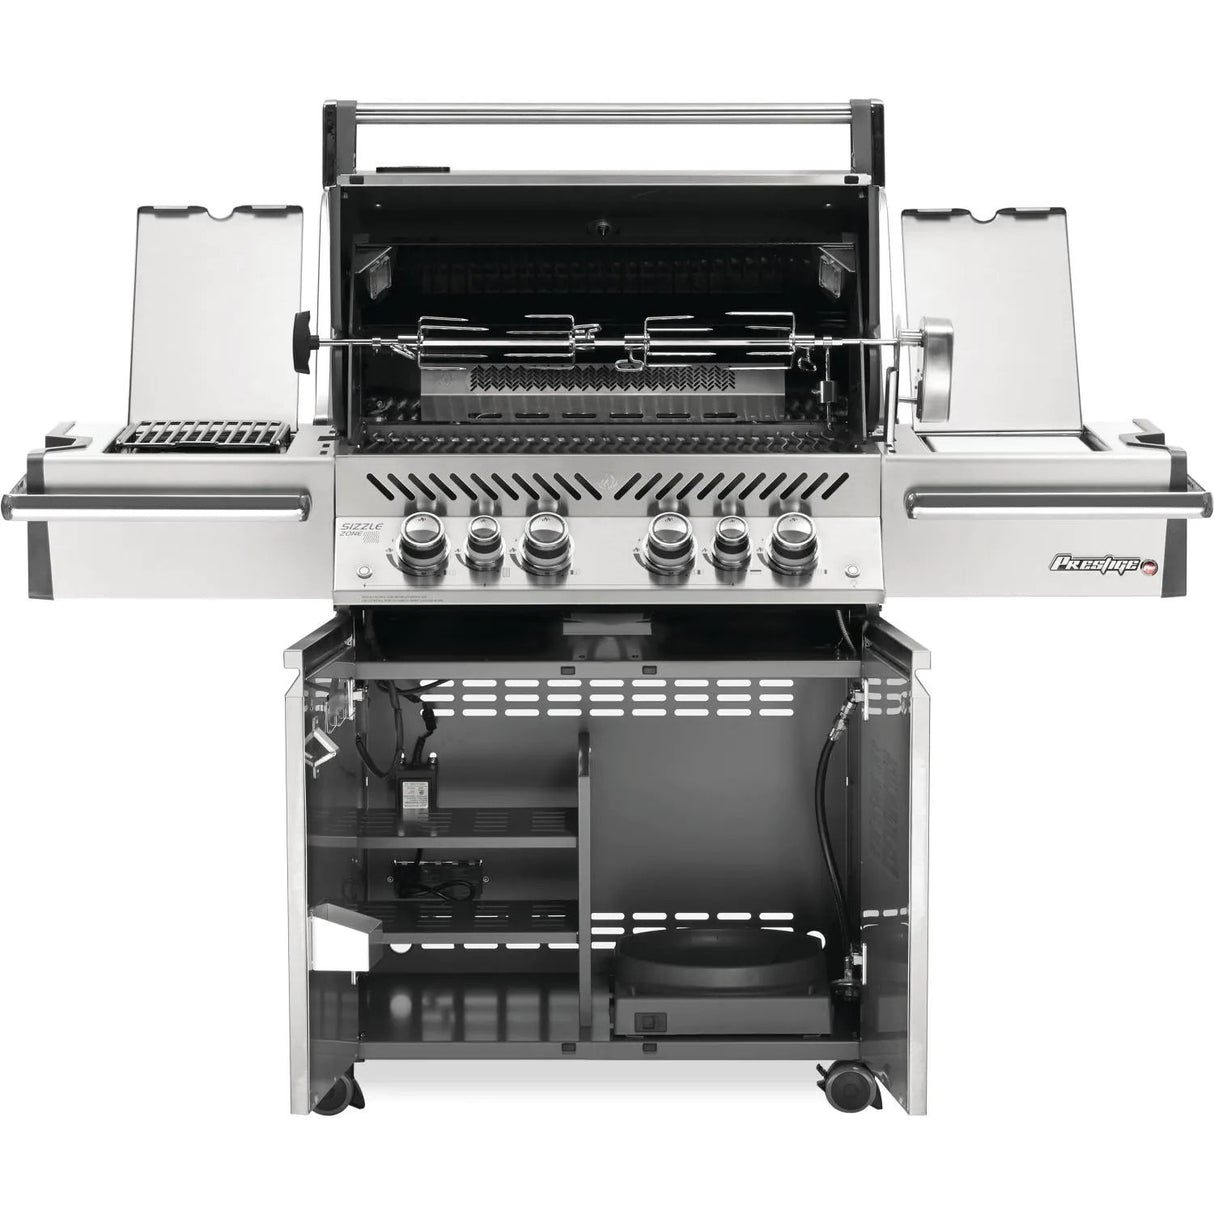 Napoleon Prestige PRO 500 Gas Grill with Infrared Rear Side Burners & Rotisserie Kit